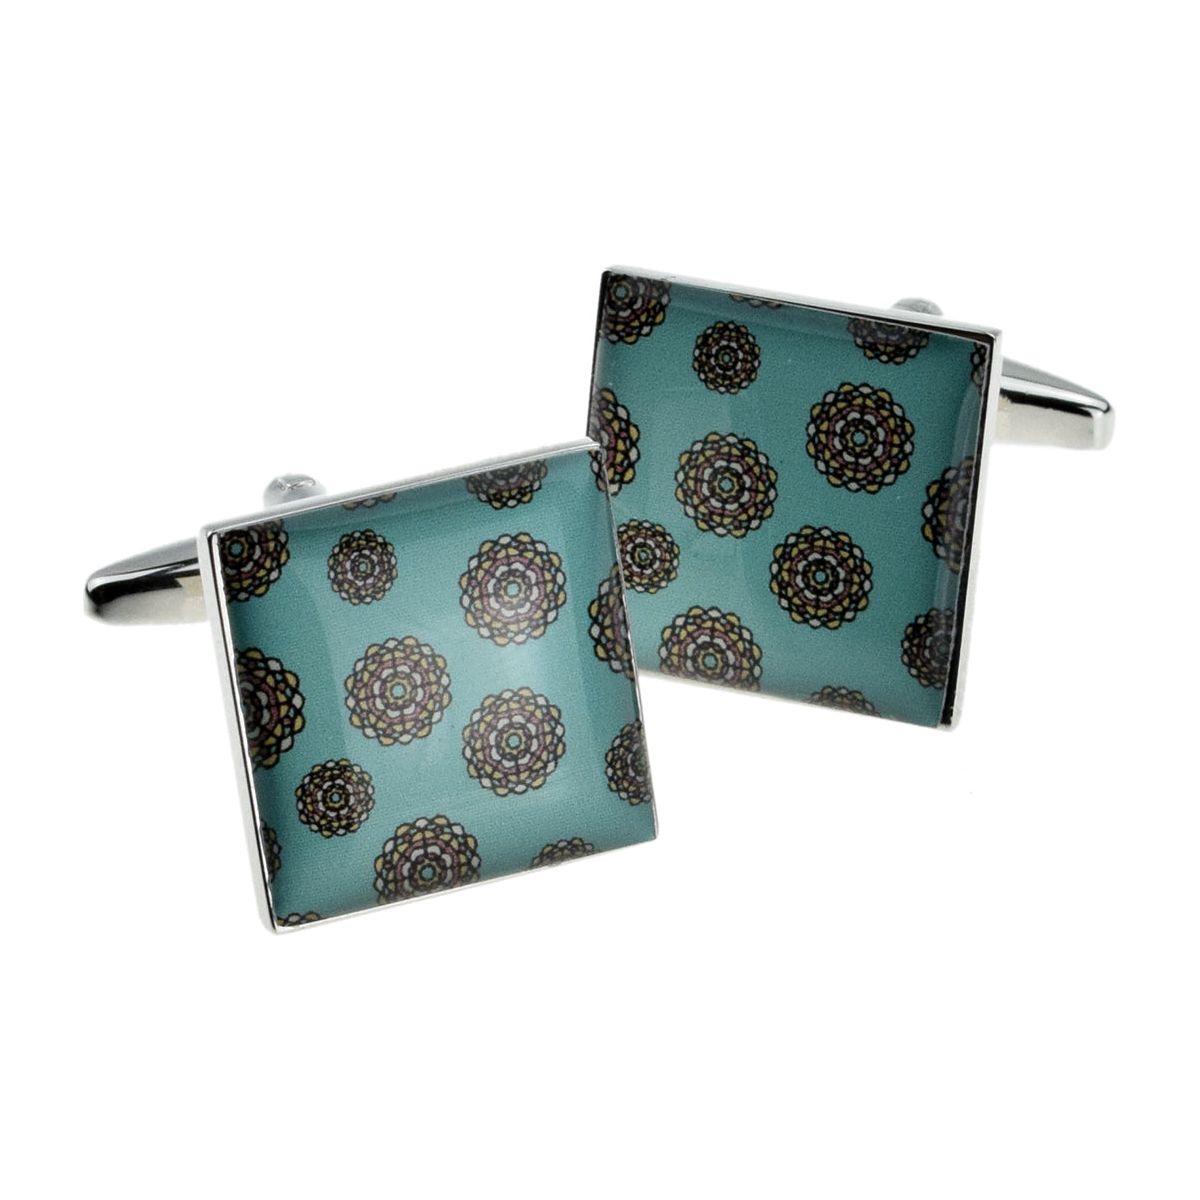 Teal Floral Design Cufflinks - Ashton and Finch